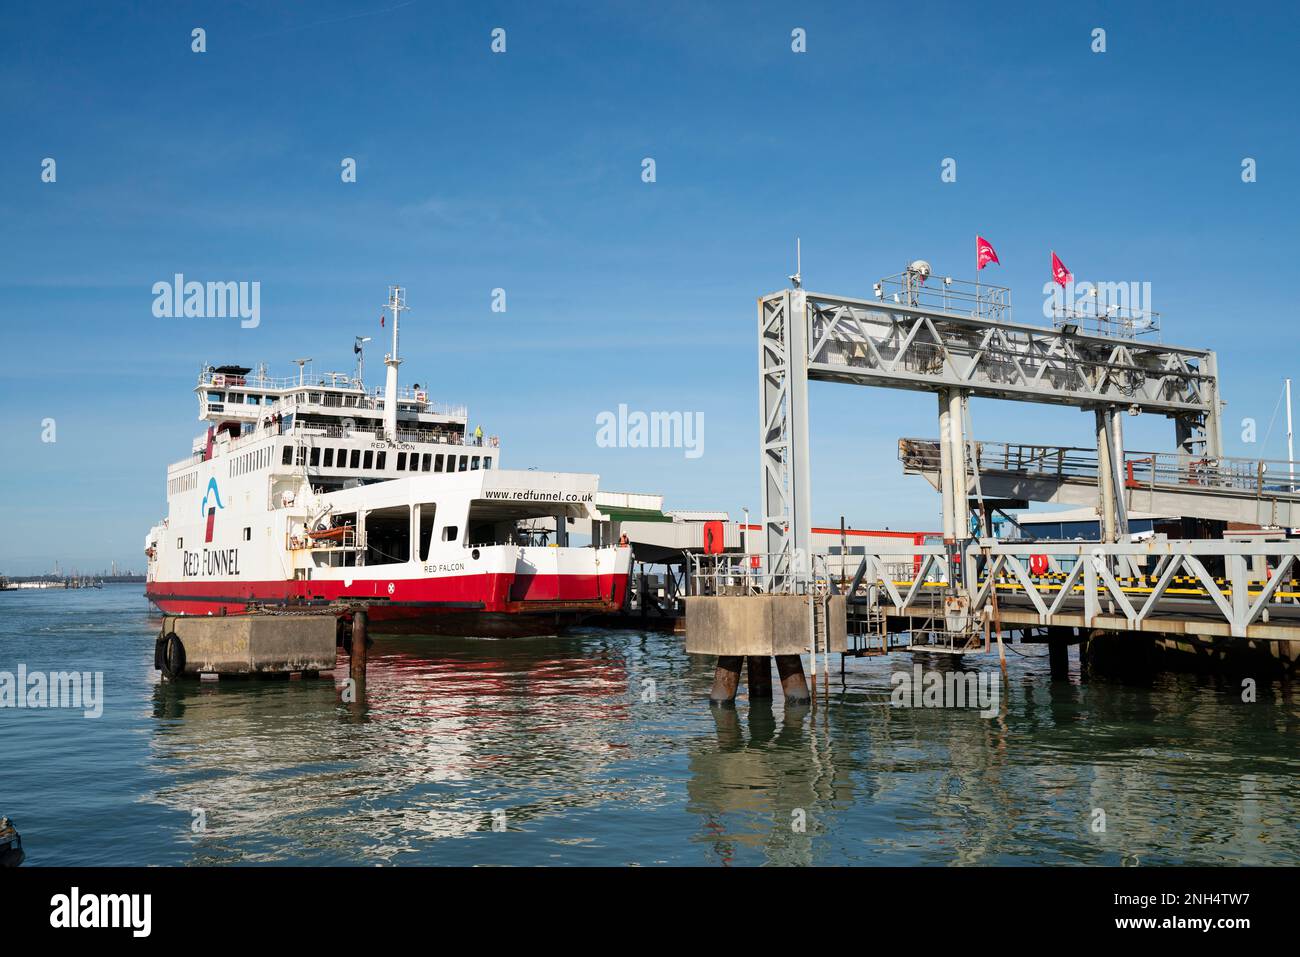 The Red Funnel Ferry, Red Falcon, docking at East Cowes on a sunny day. Stock Photo